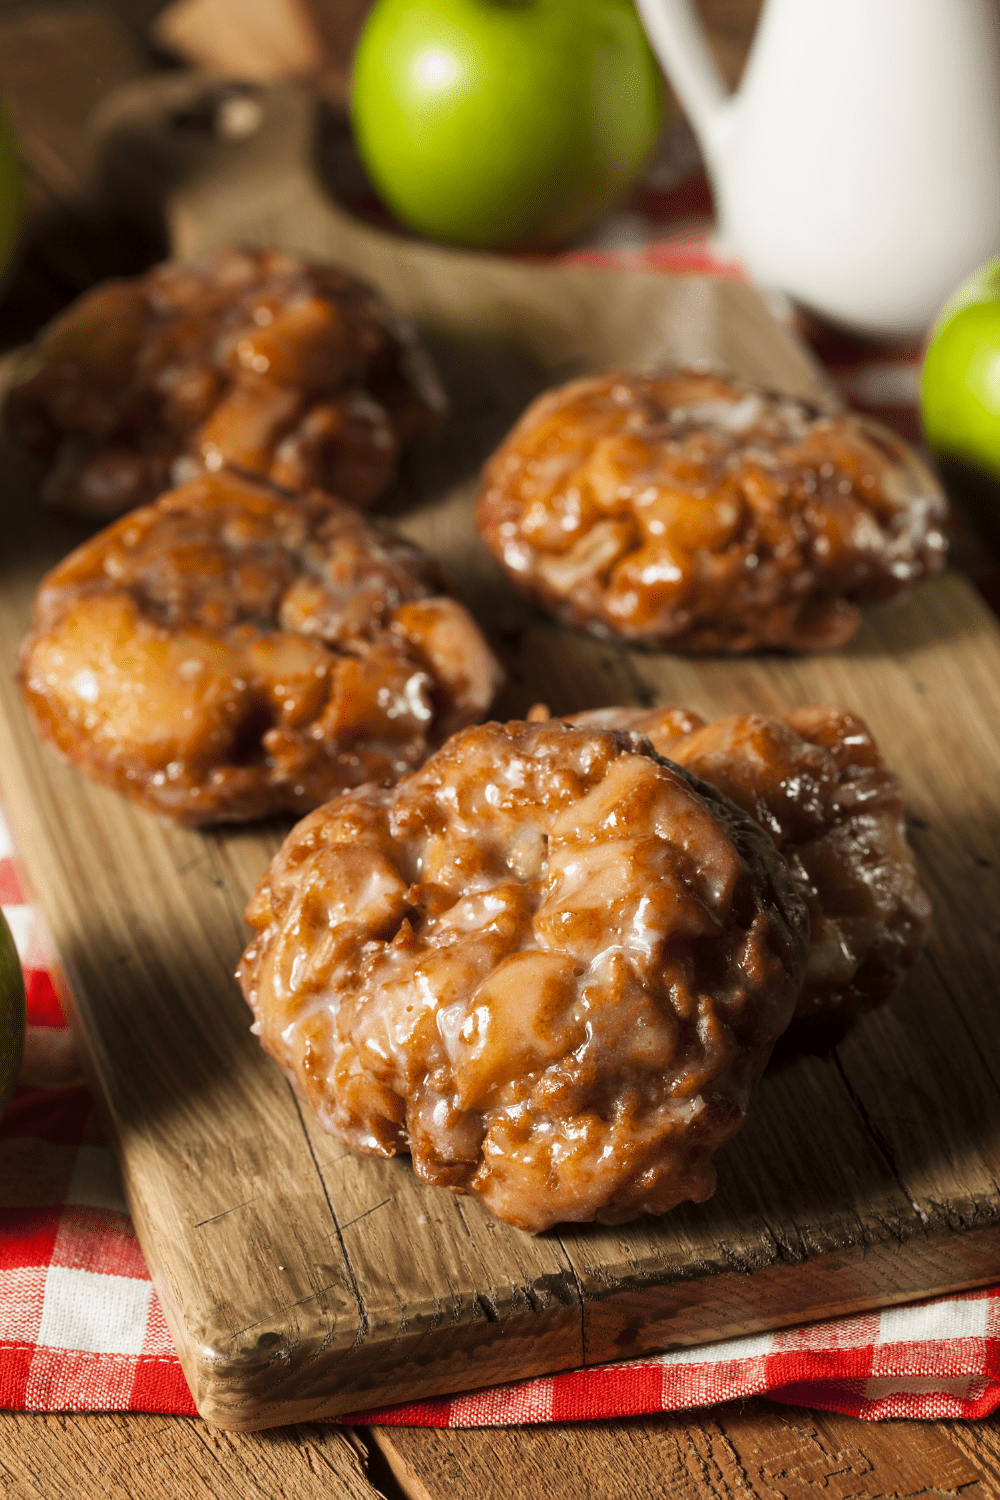 Homemade Glazed Apple Fritters in a wooden board. 